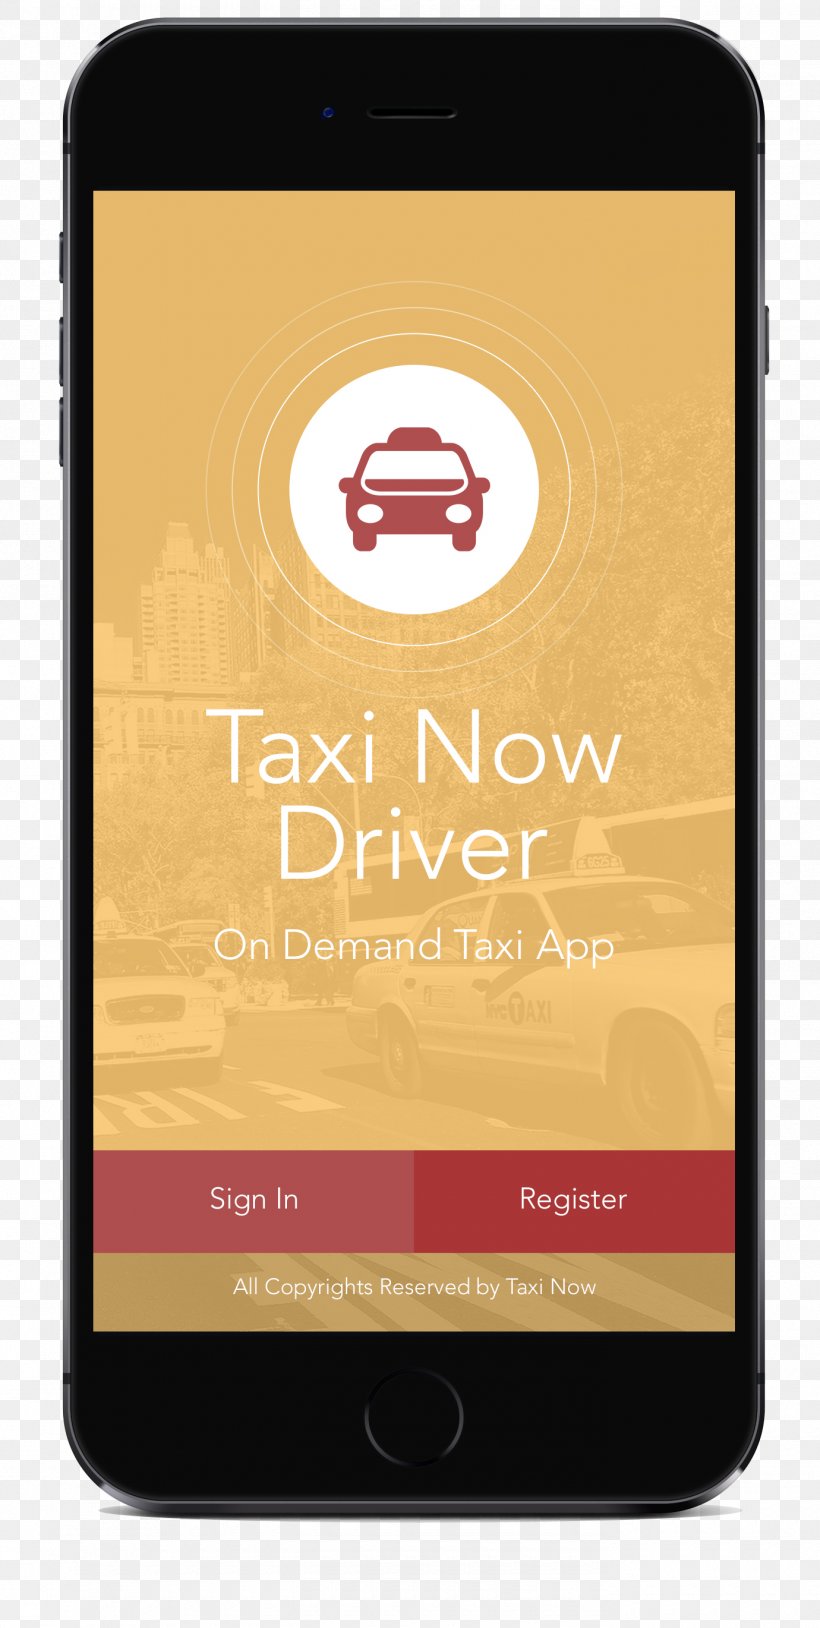 Download uber taxi app for android